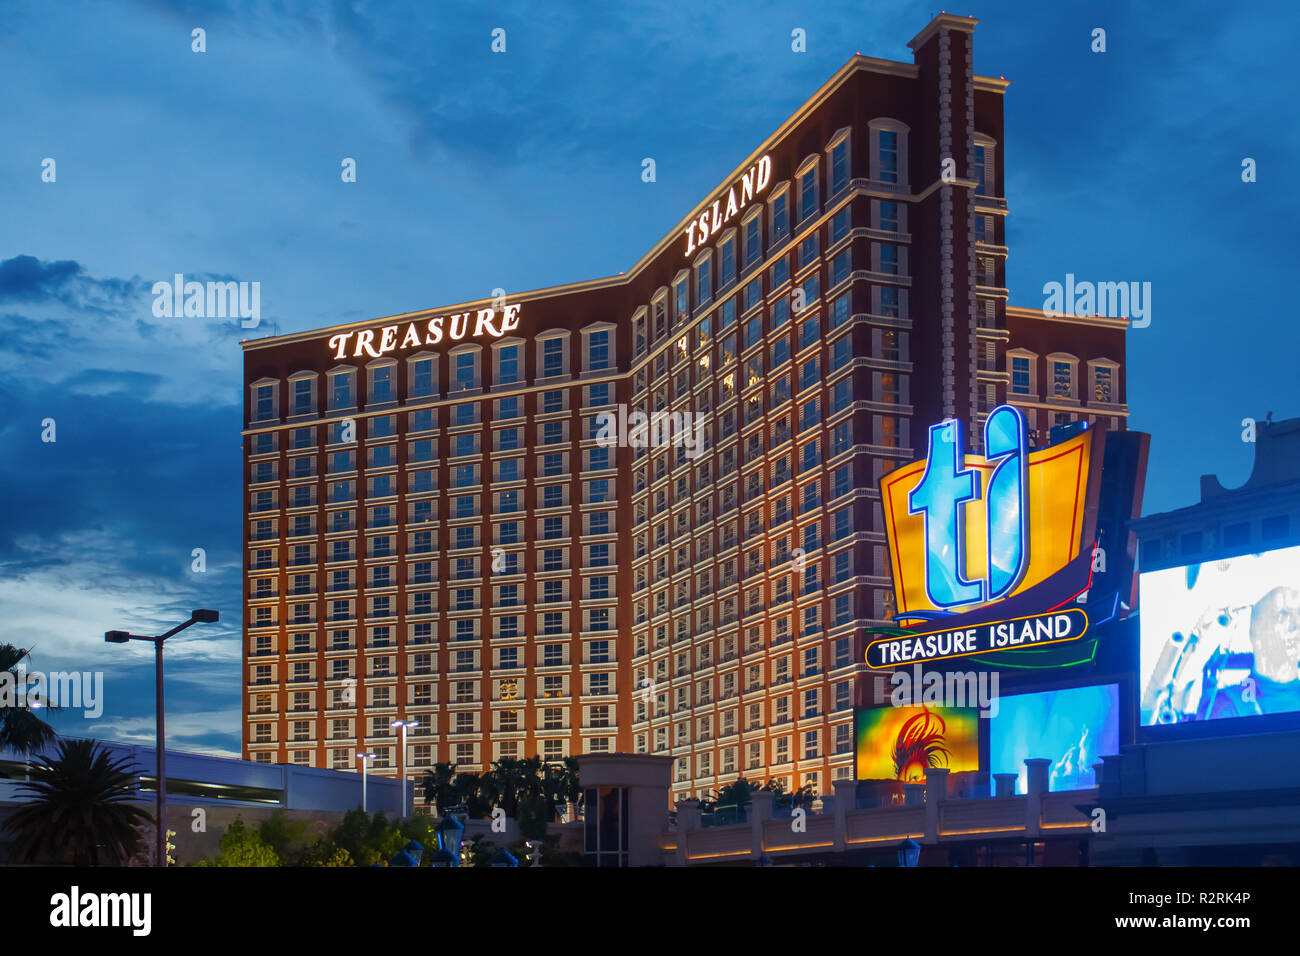 LAS VEGAS, NEVADA - May 31, 2009: Treasure Island hotel and casino in Las Vegas. This Caribbean themed resort has an hotel with 2,884 rooms. Stock Photo